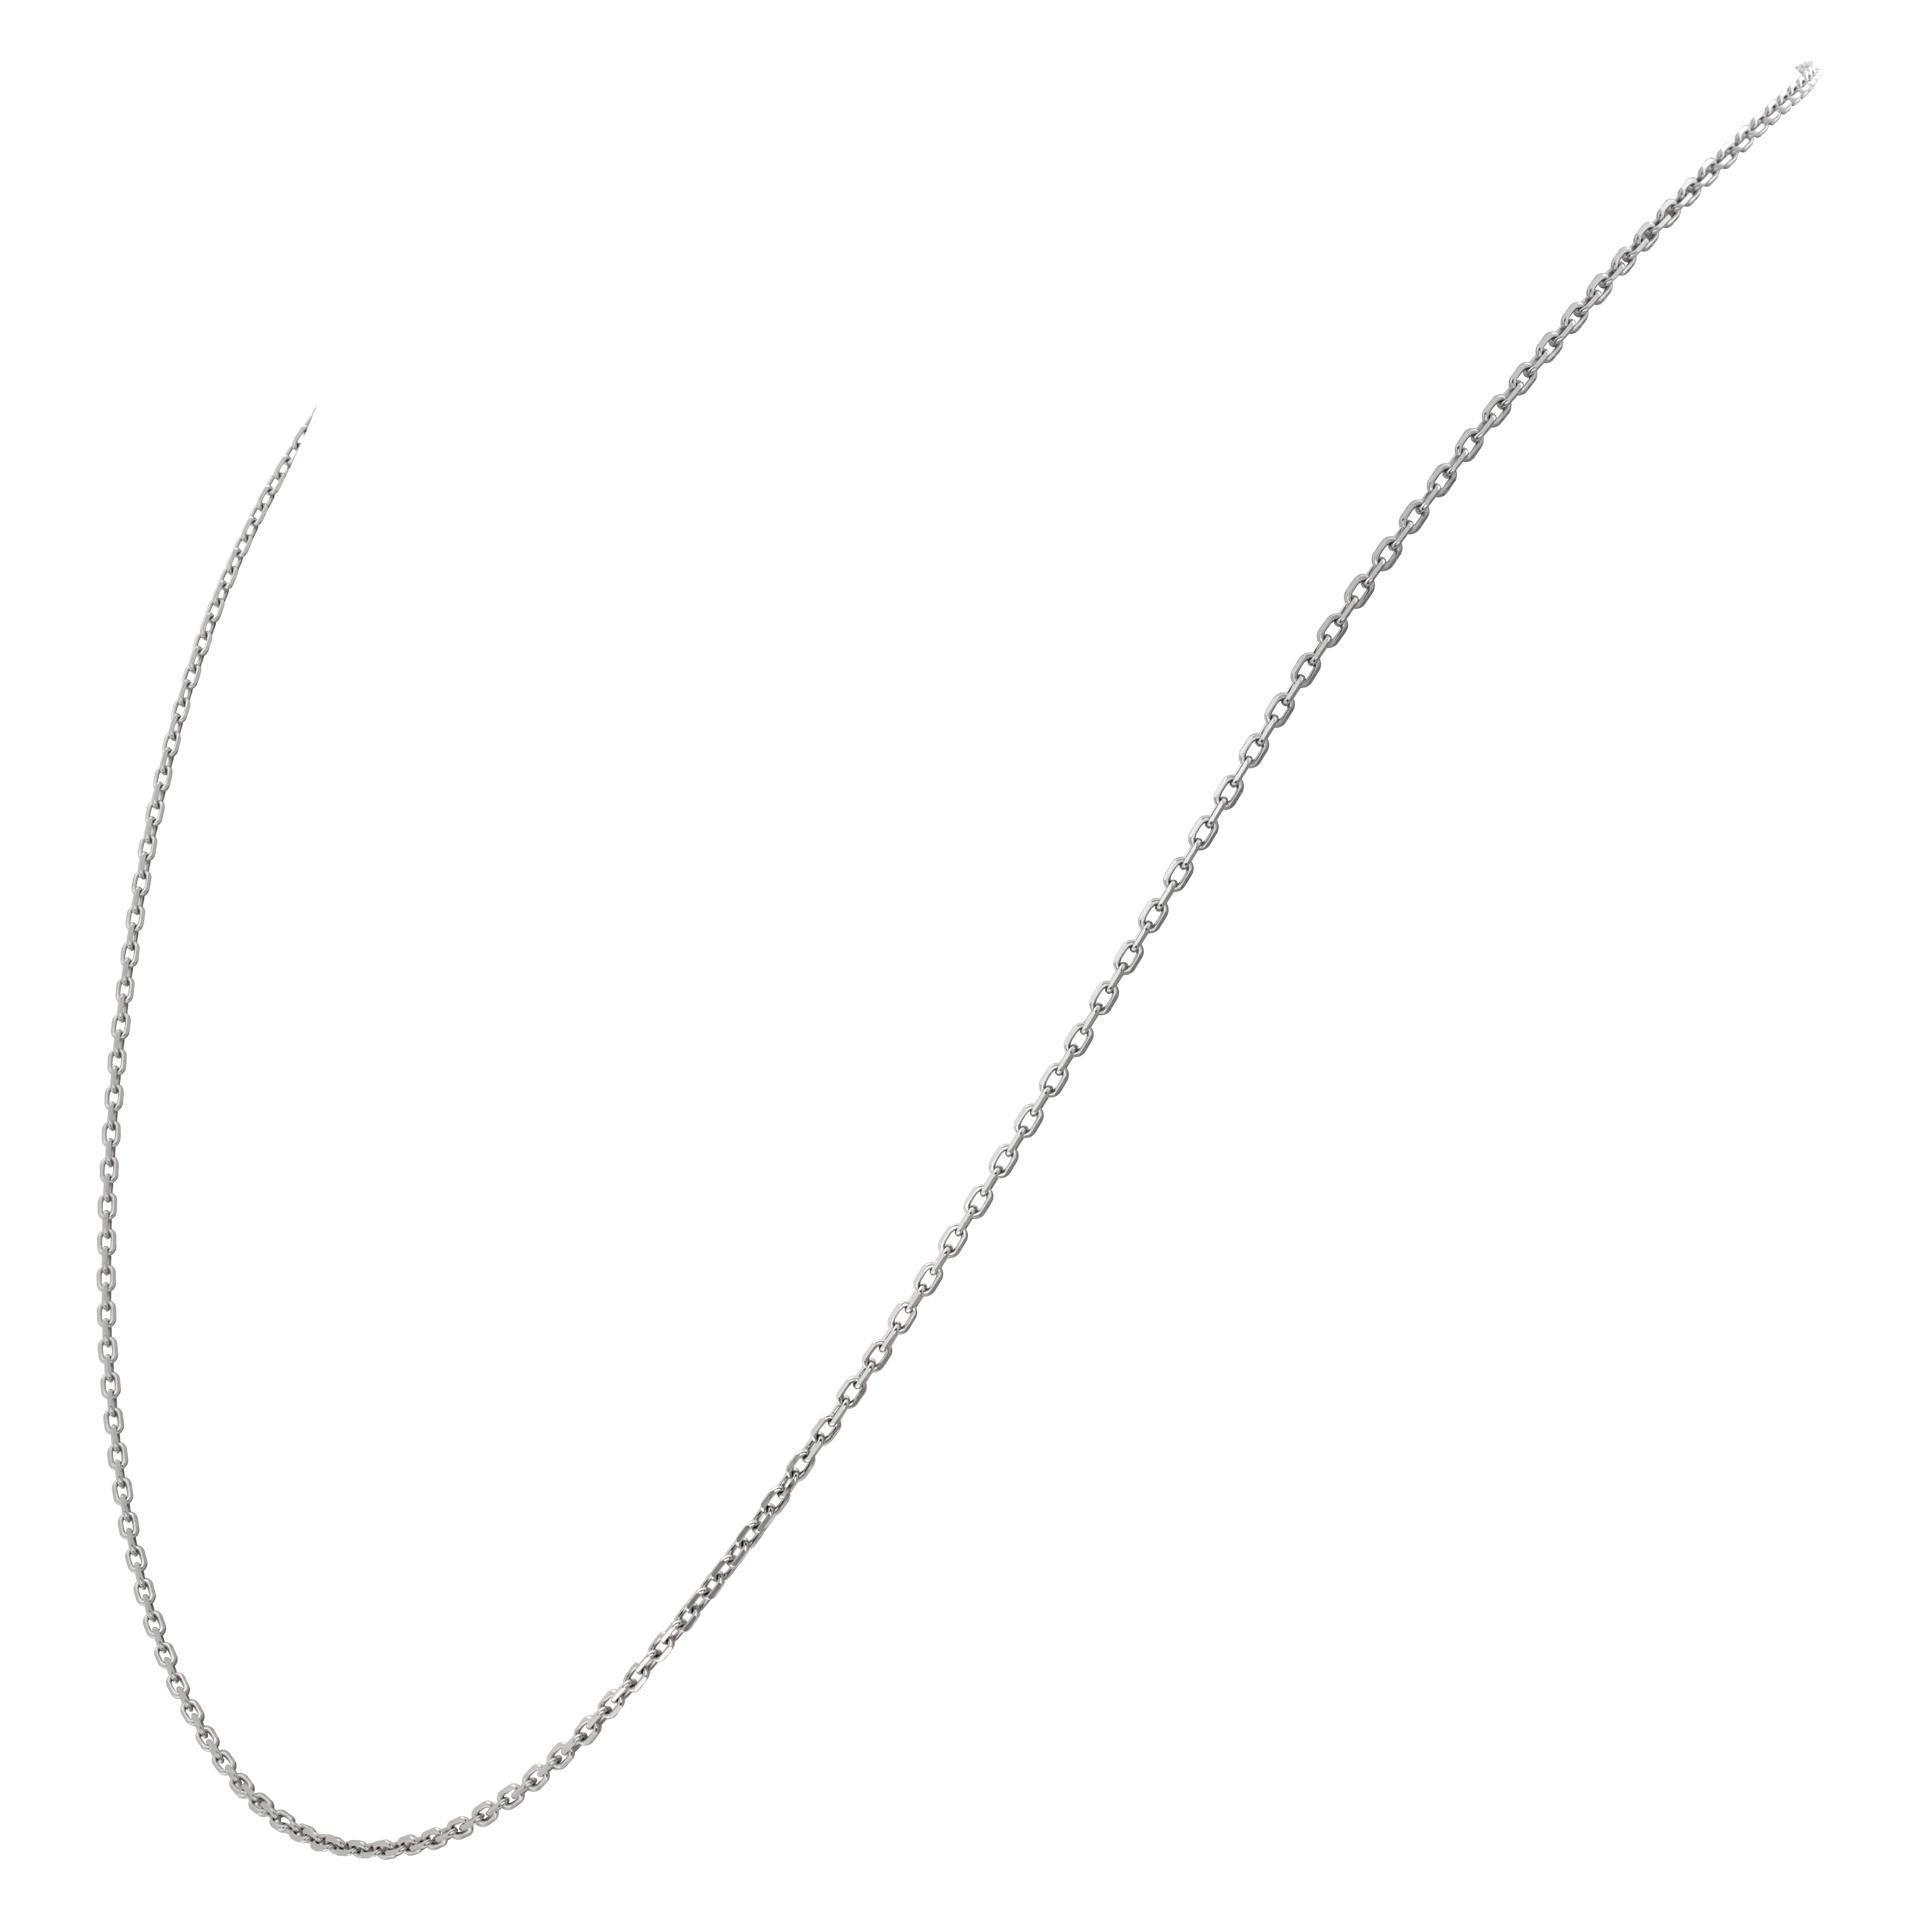 White gold thin link chain In Excellent Condition For Sale In Surfside, FL